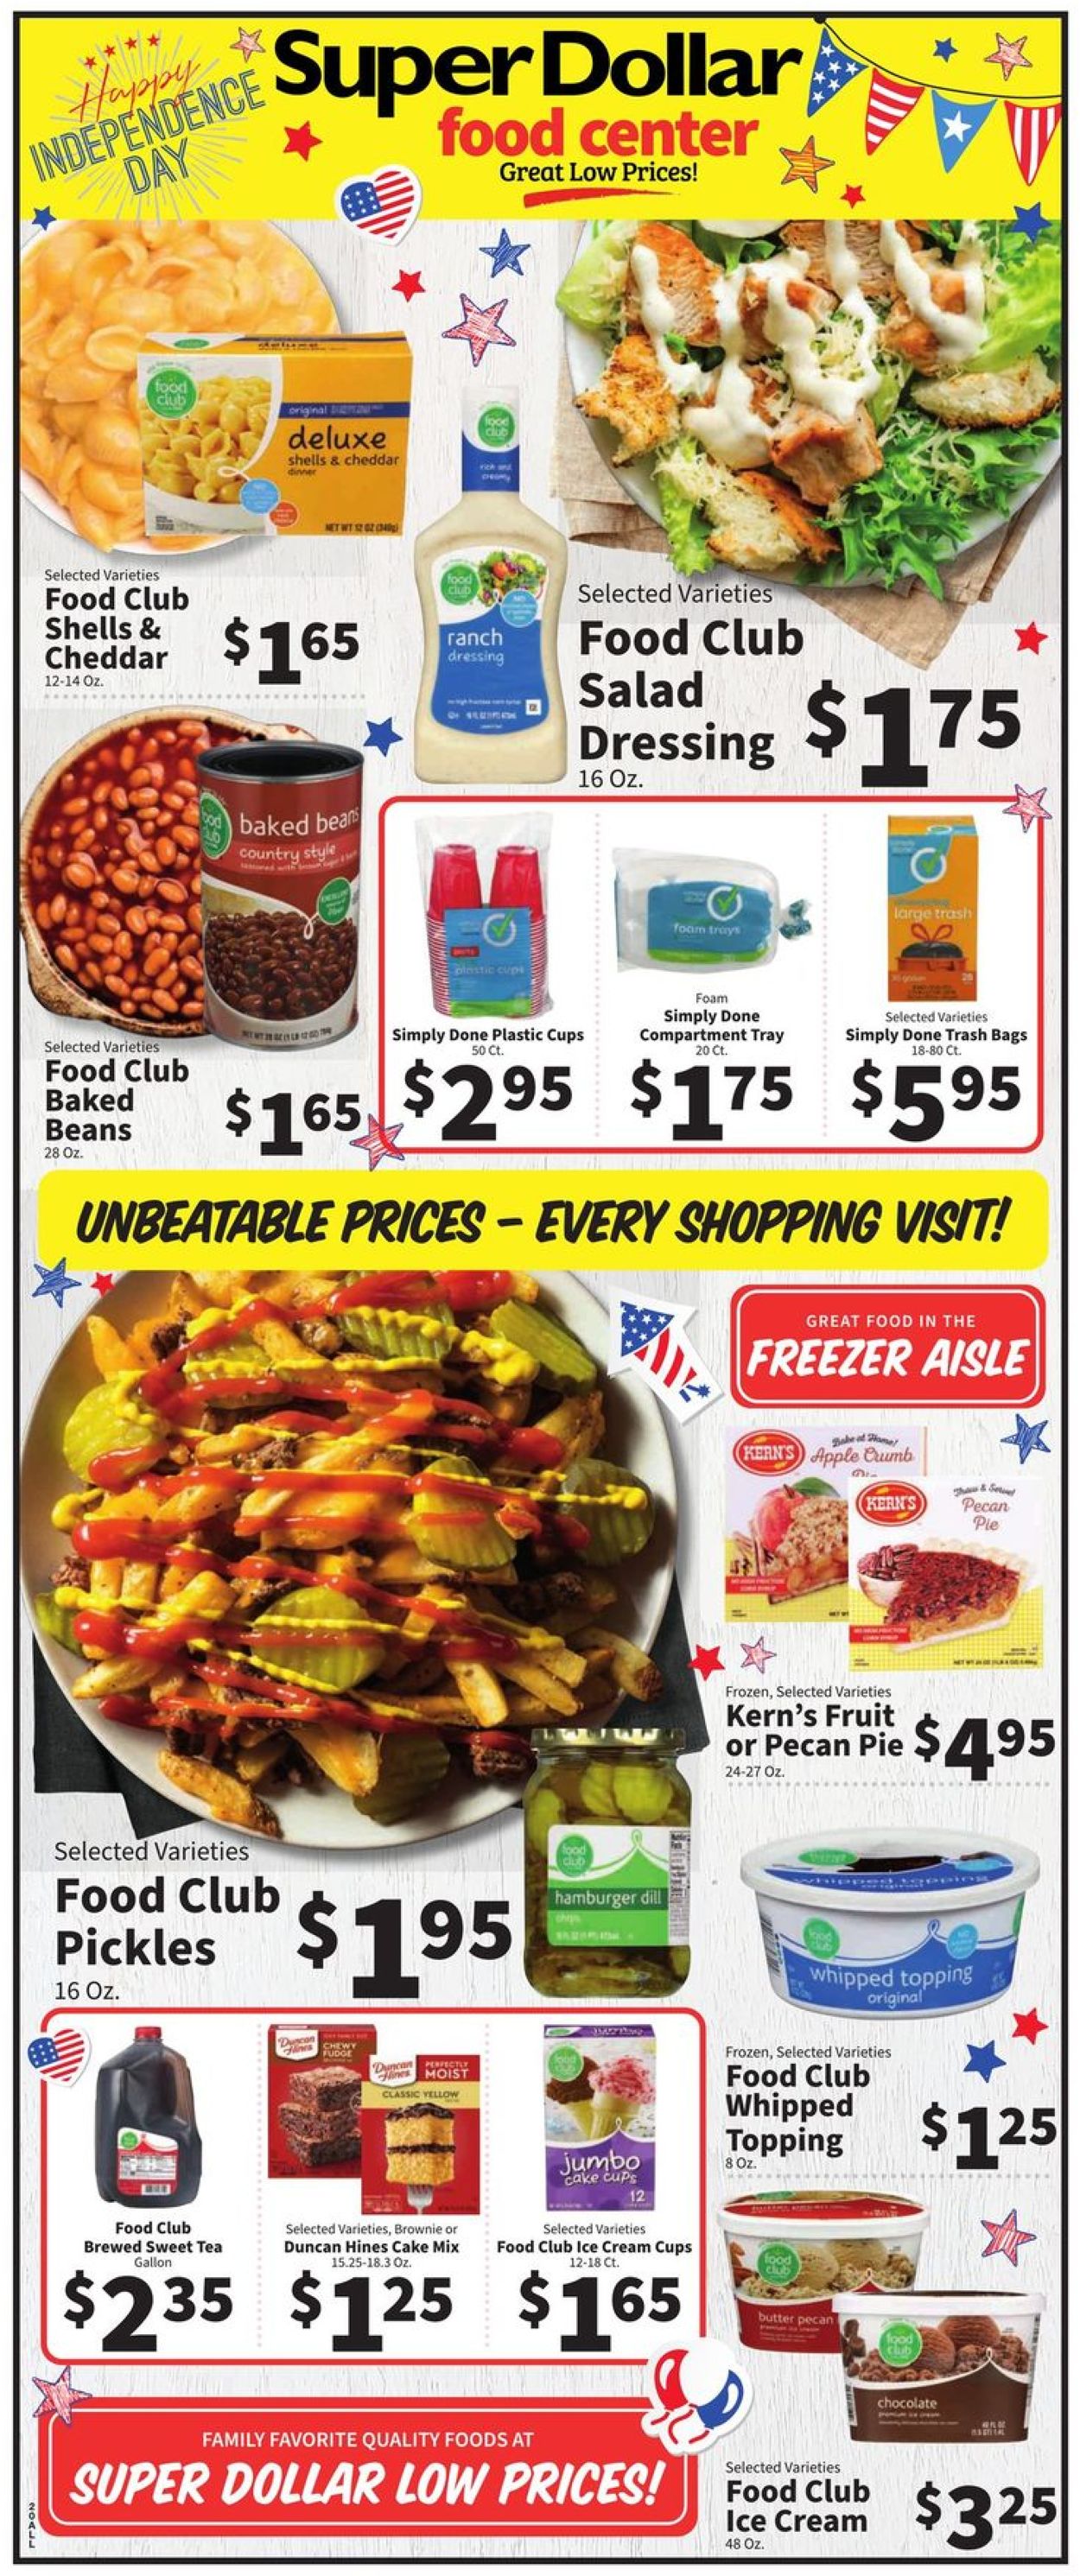 Super Dollar Food Center - 4th of July Sale Weekly Ad Circular - valid 06/29-07/05/2022 (Page 2)